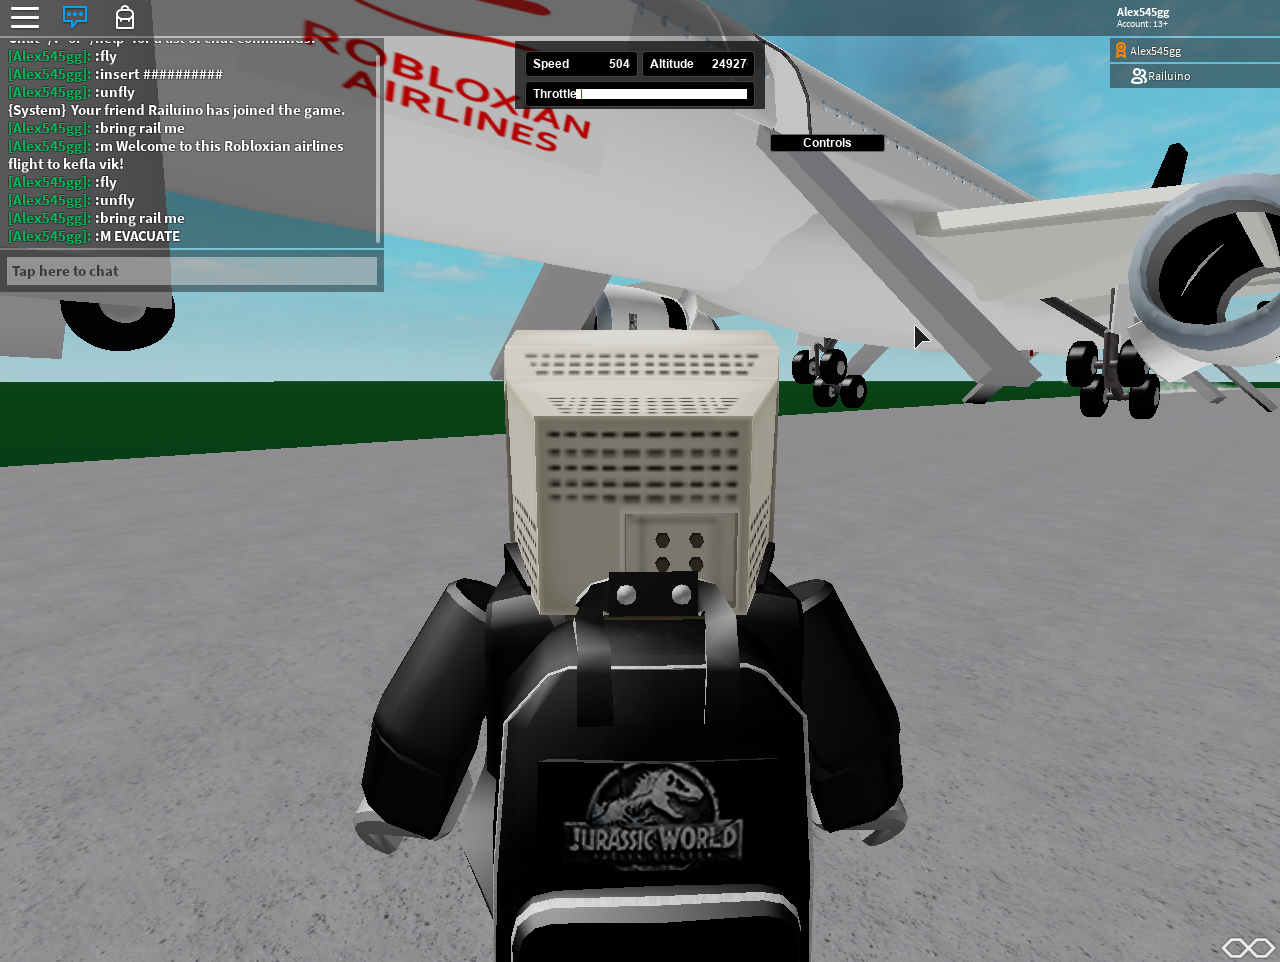 Roblox Airlines Flight 1850 The Roblox Airline Industry - airplane roblox game